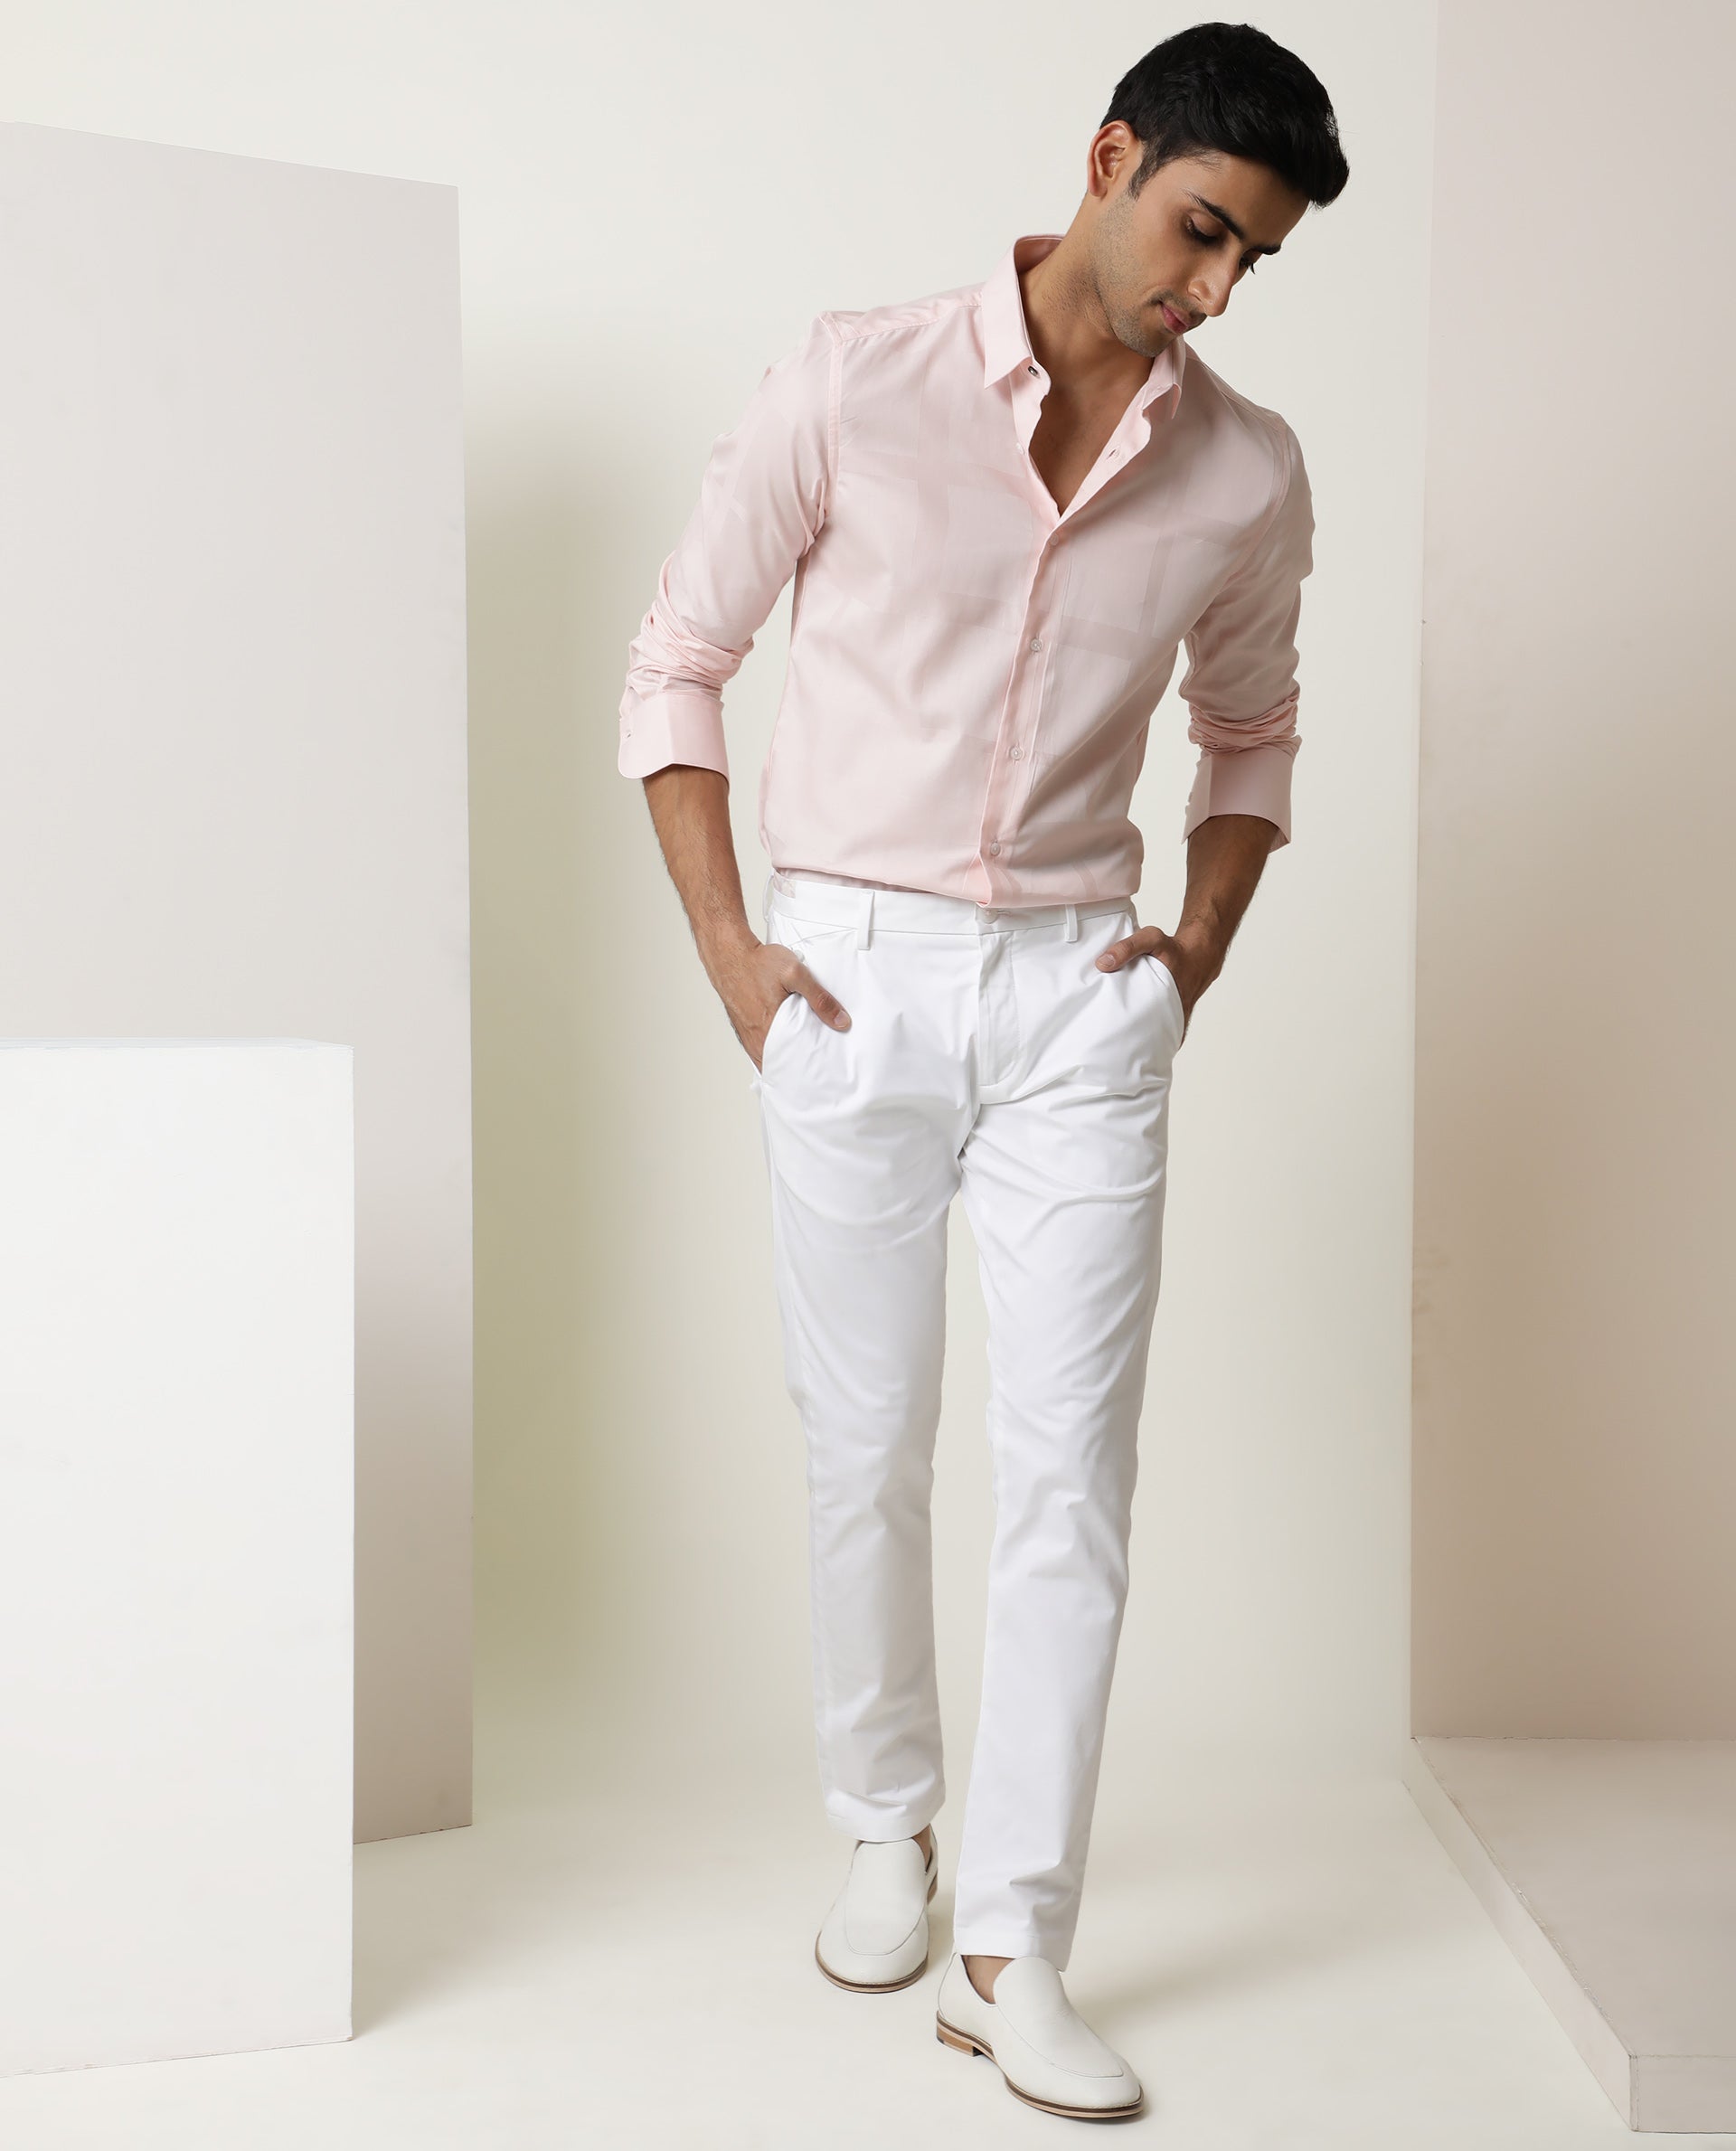 Buy White Trousers  Pants for Men by Antar Agni Clothing Online  Ajiocom